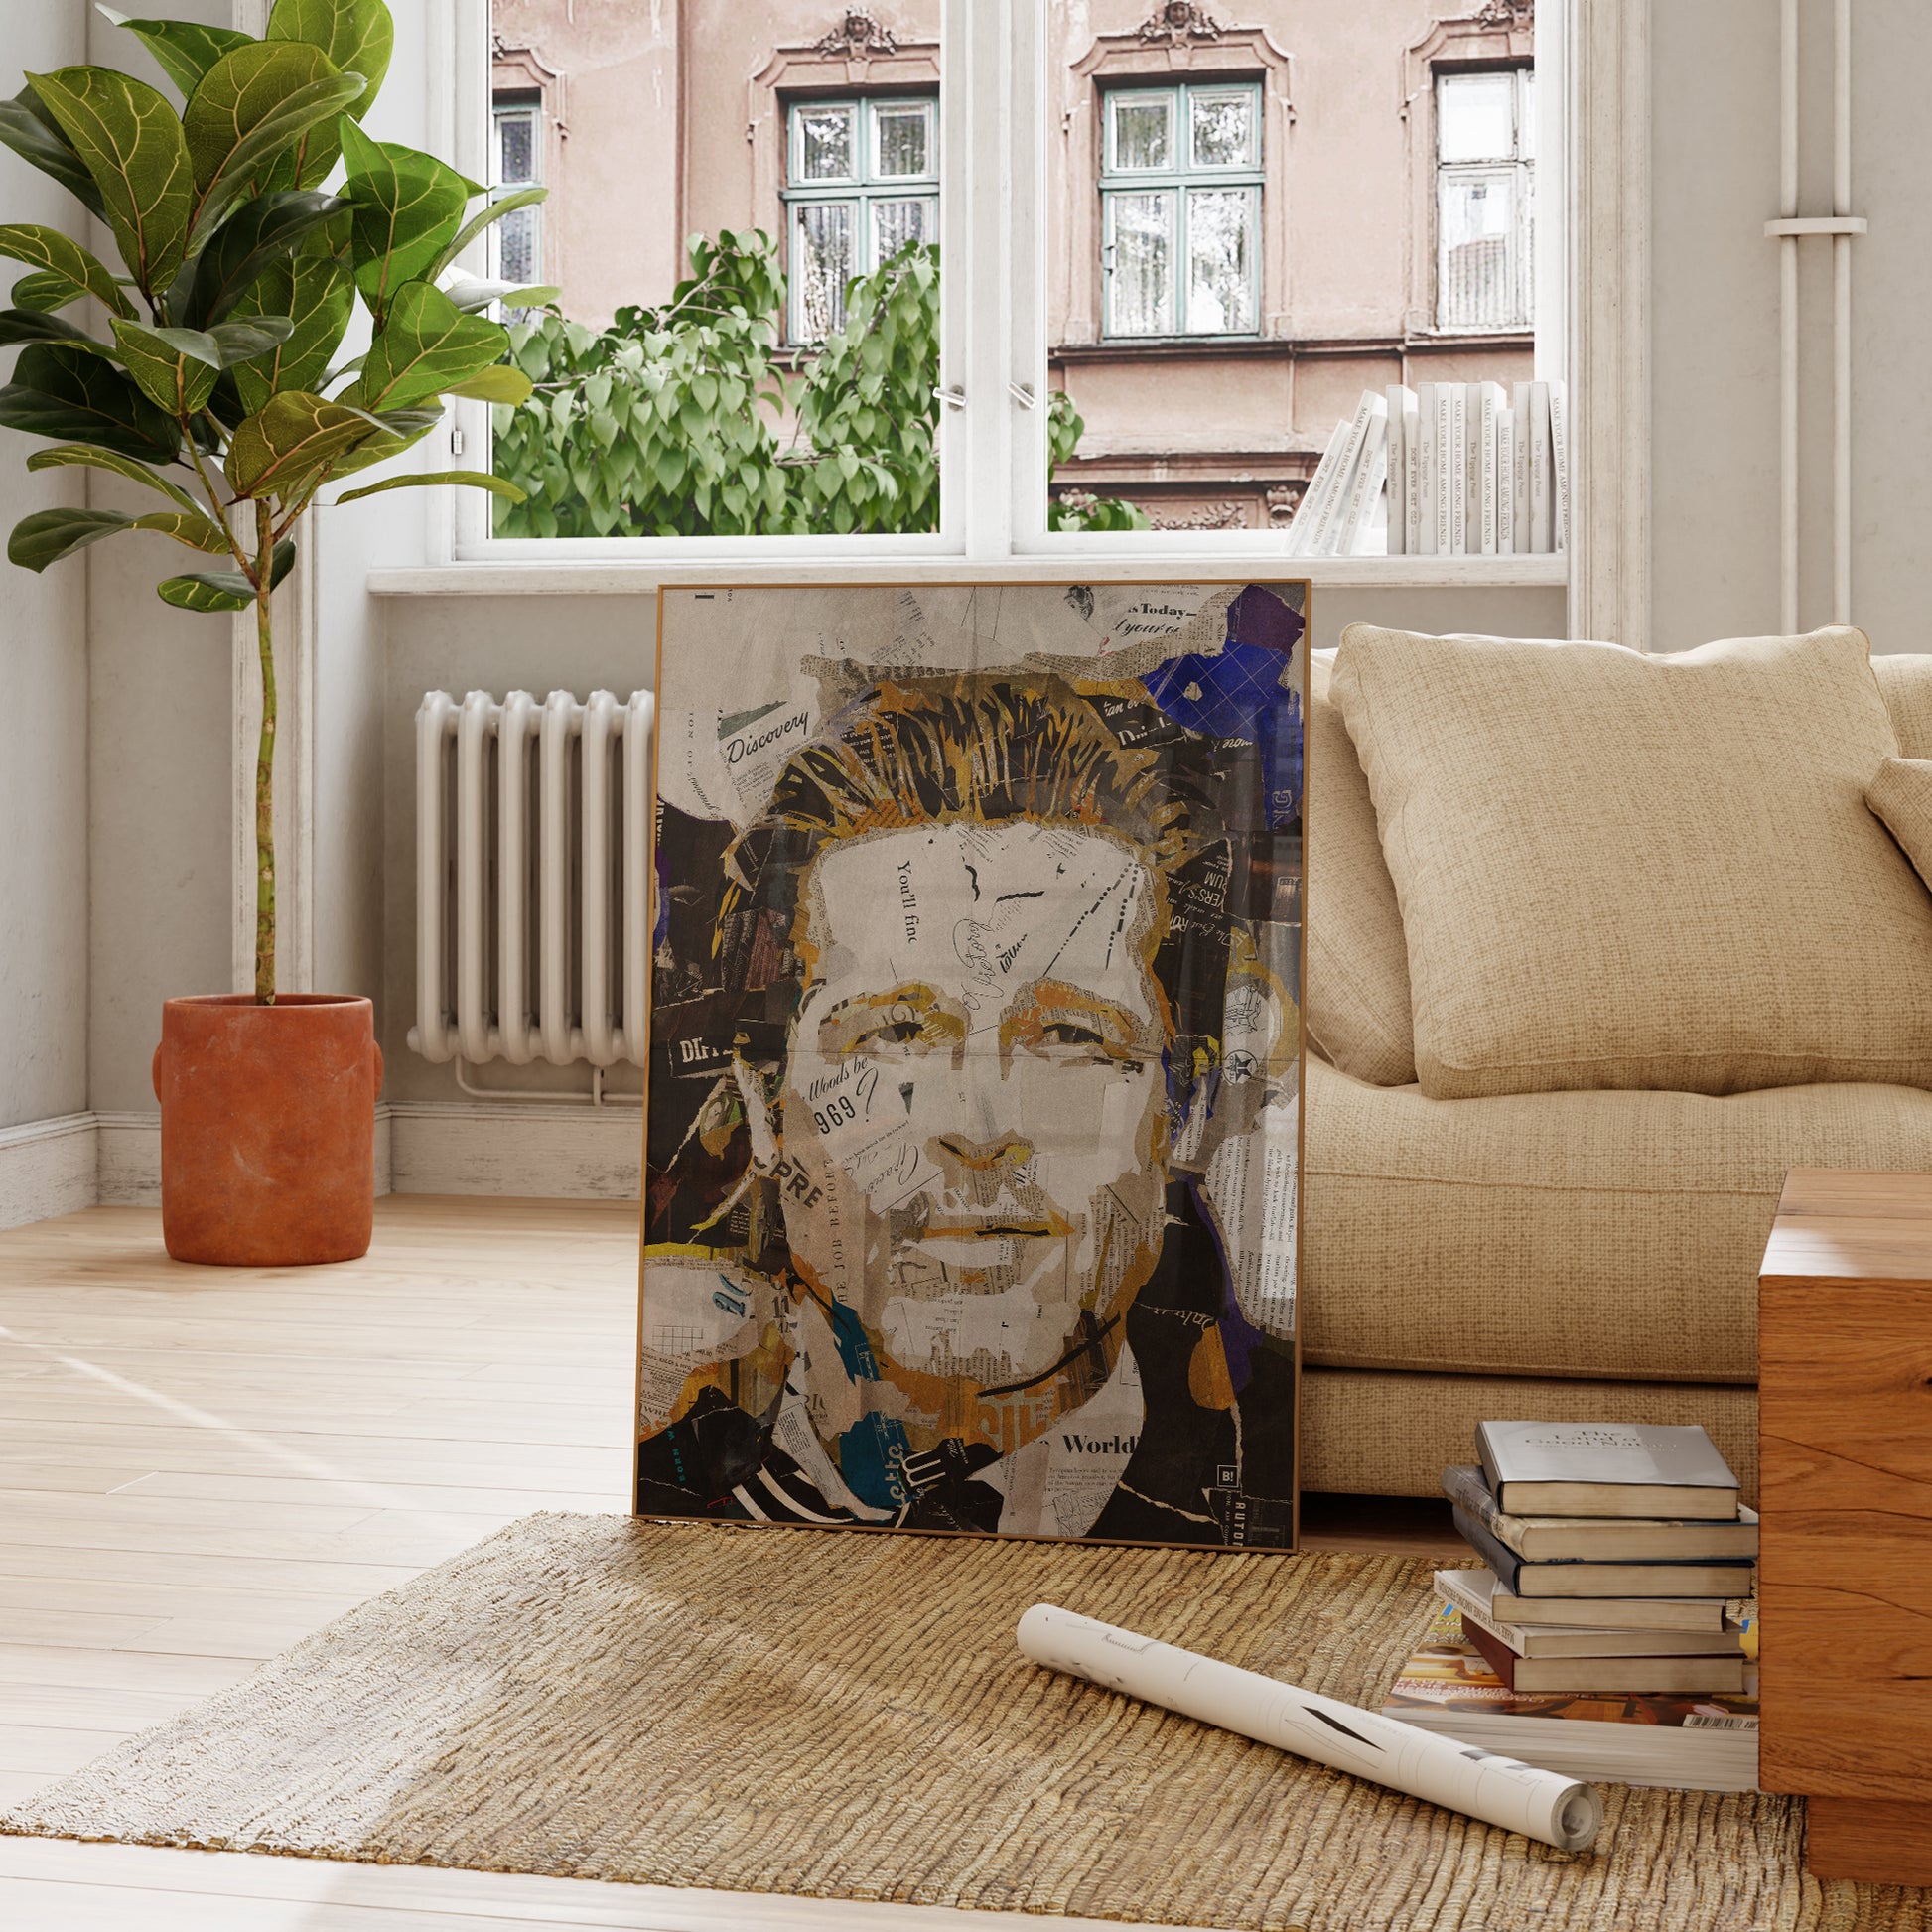 Be inspired by our iconic collage portrait art print of Brad Pitt. This artwork was printed using the giclée process on archival acid-free paper and is presented in a French living room, capturing its timeless beauty in every detail.